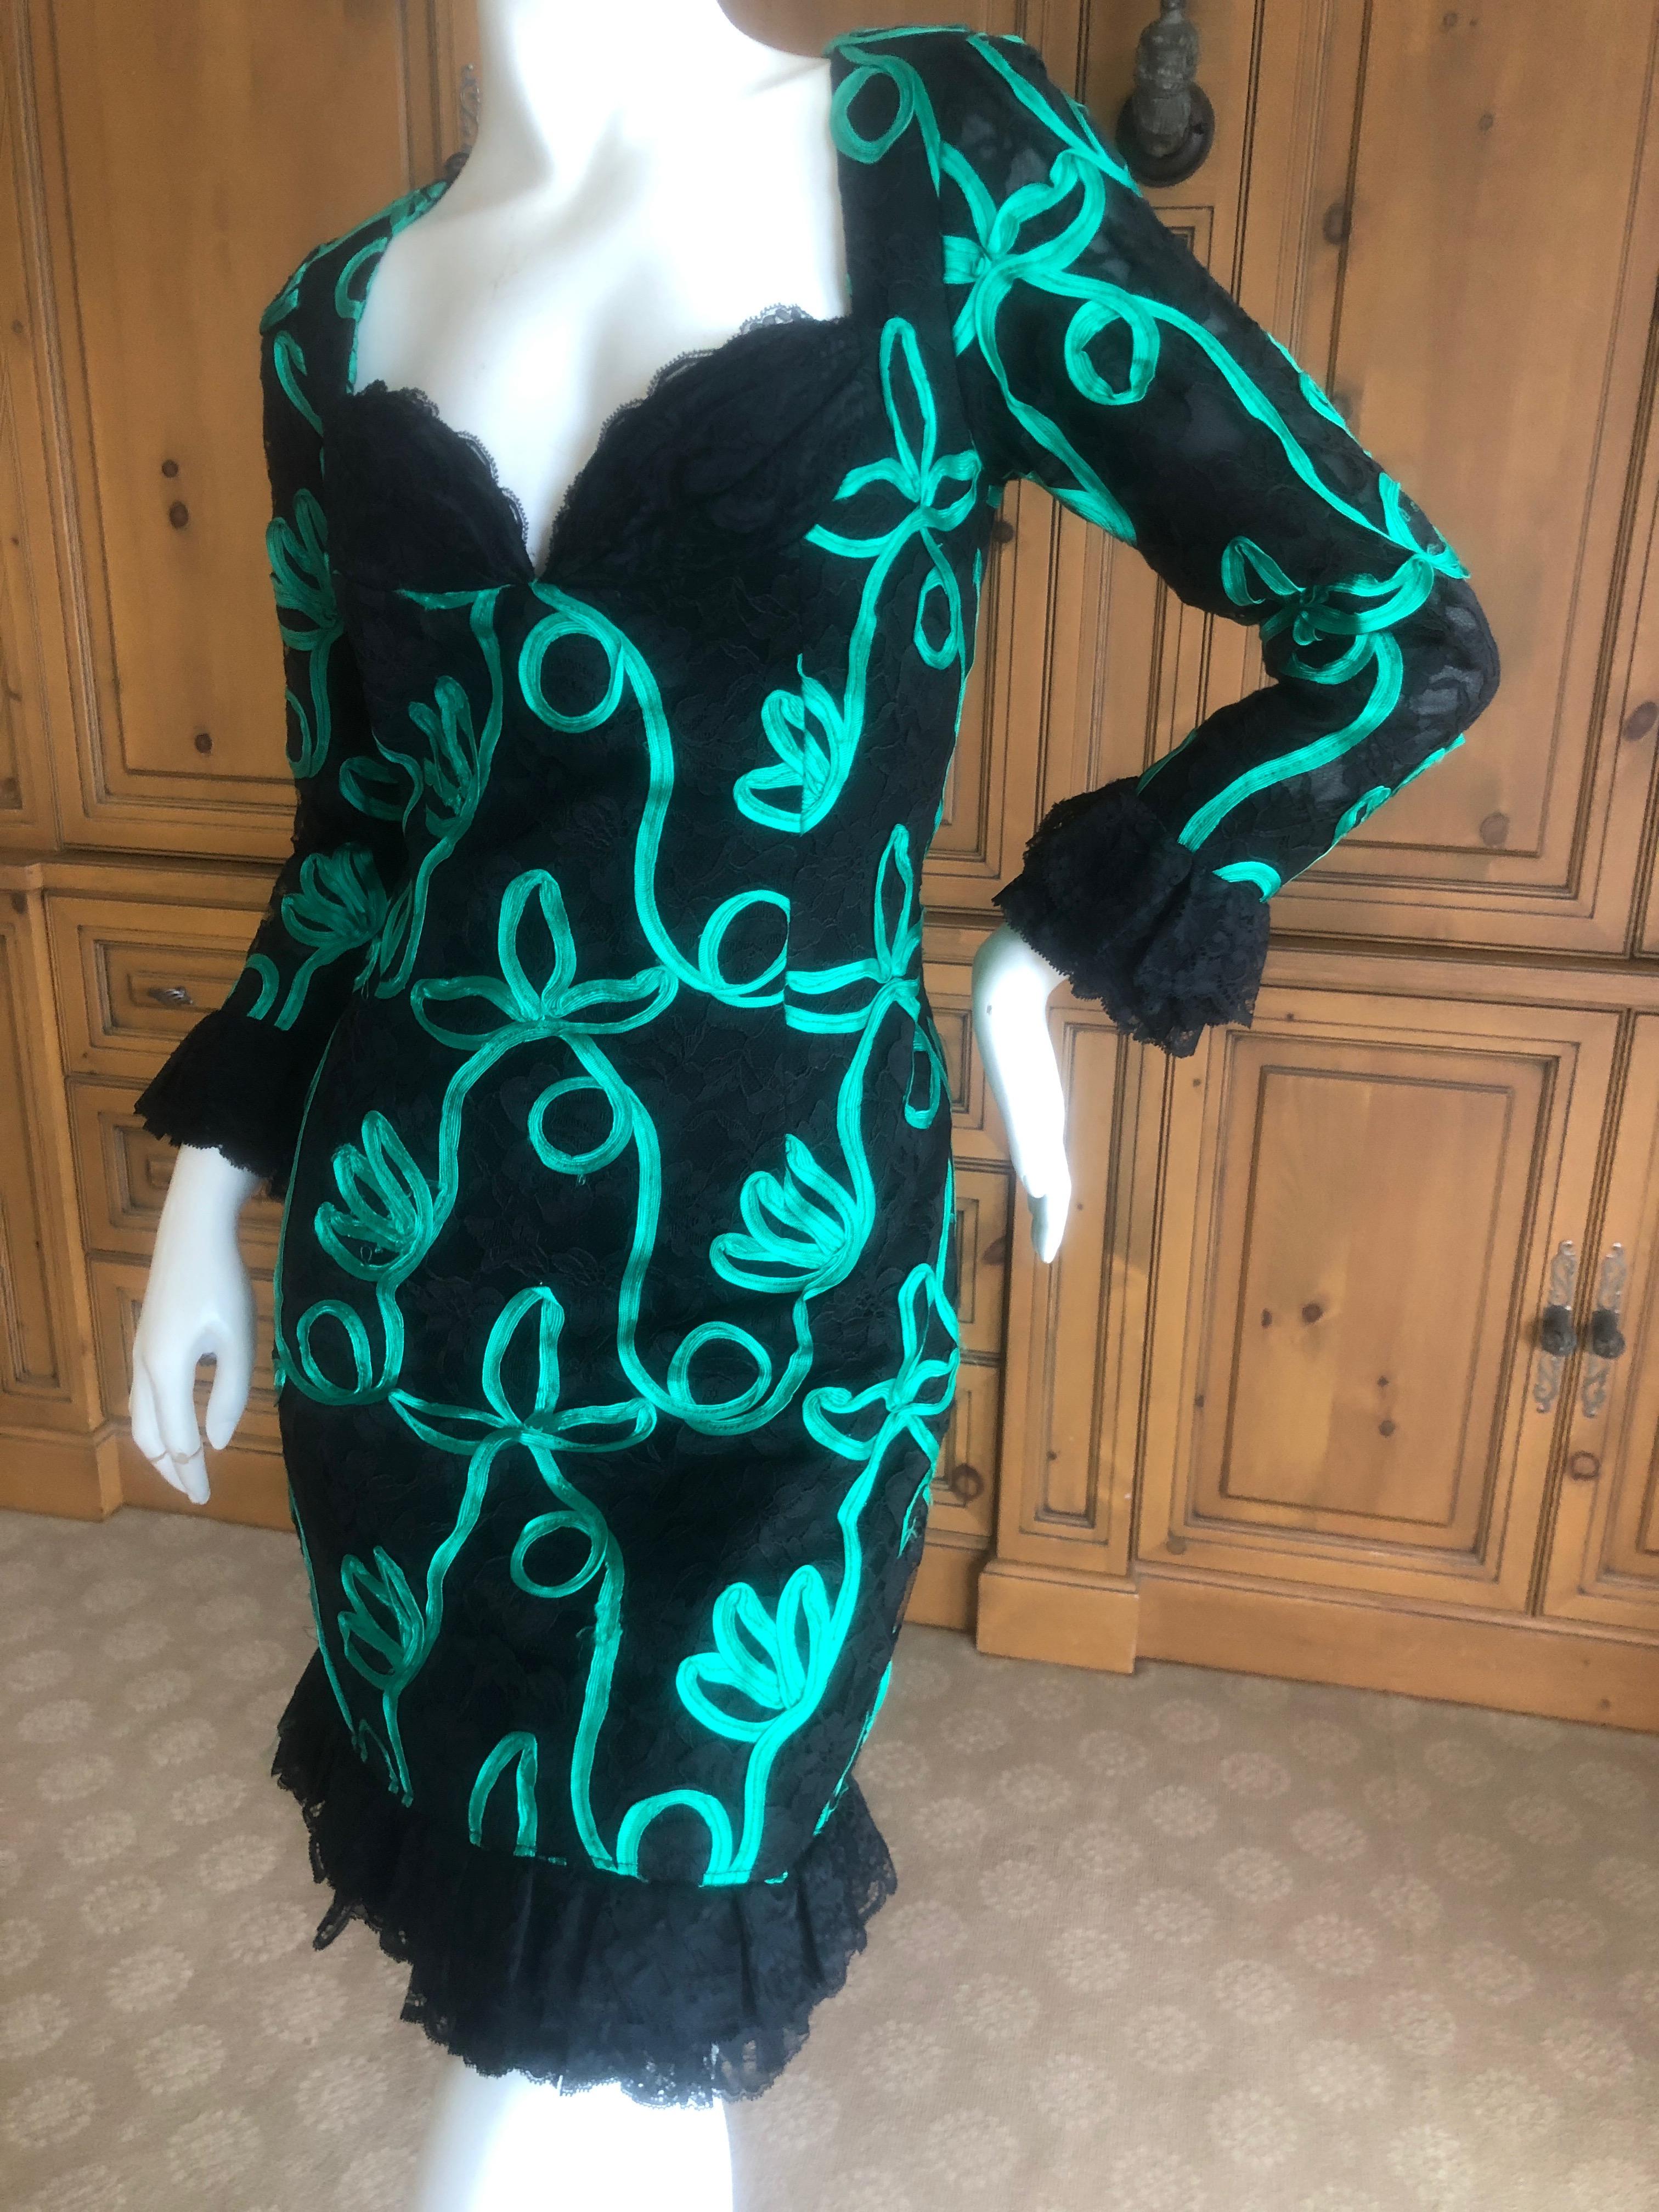  Christian Dior by Marc Bohan Black Lace Embellished Mini Cocktail Dress In Excellent Condition For Sale In Cloverdale, CA